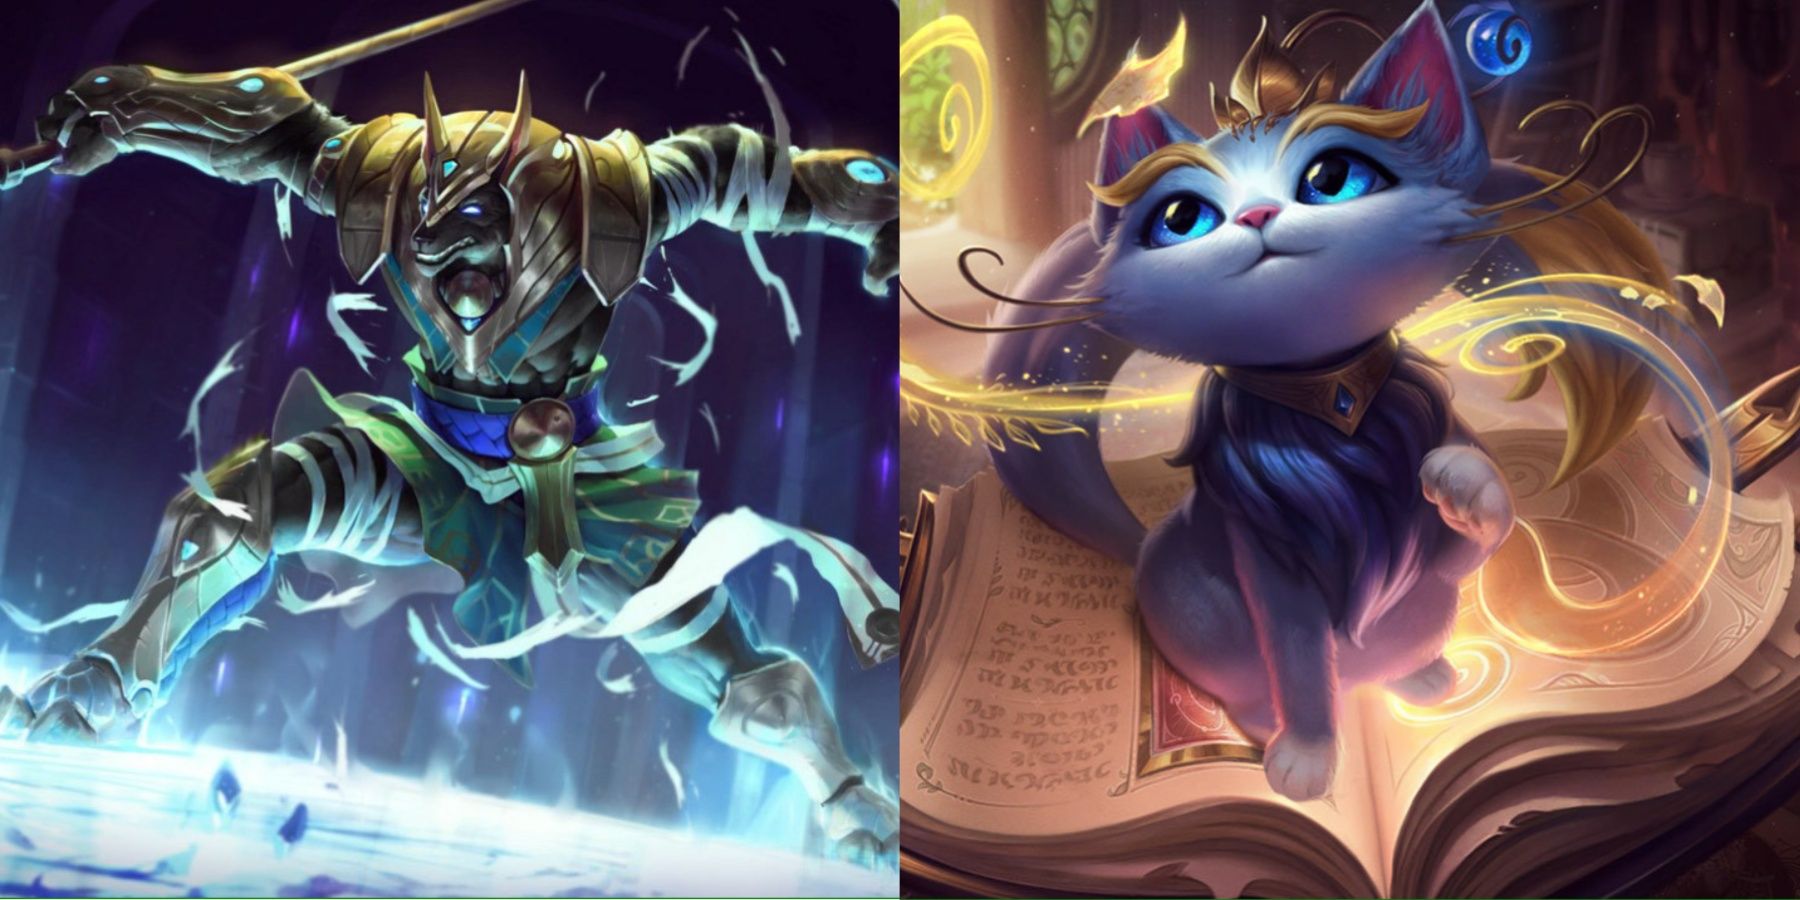 Nasus casting his E and Yuumi casting her Q in their League of Legends splash art